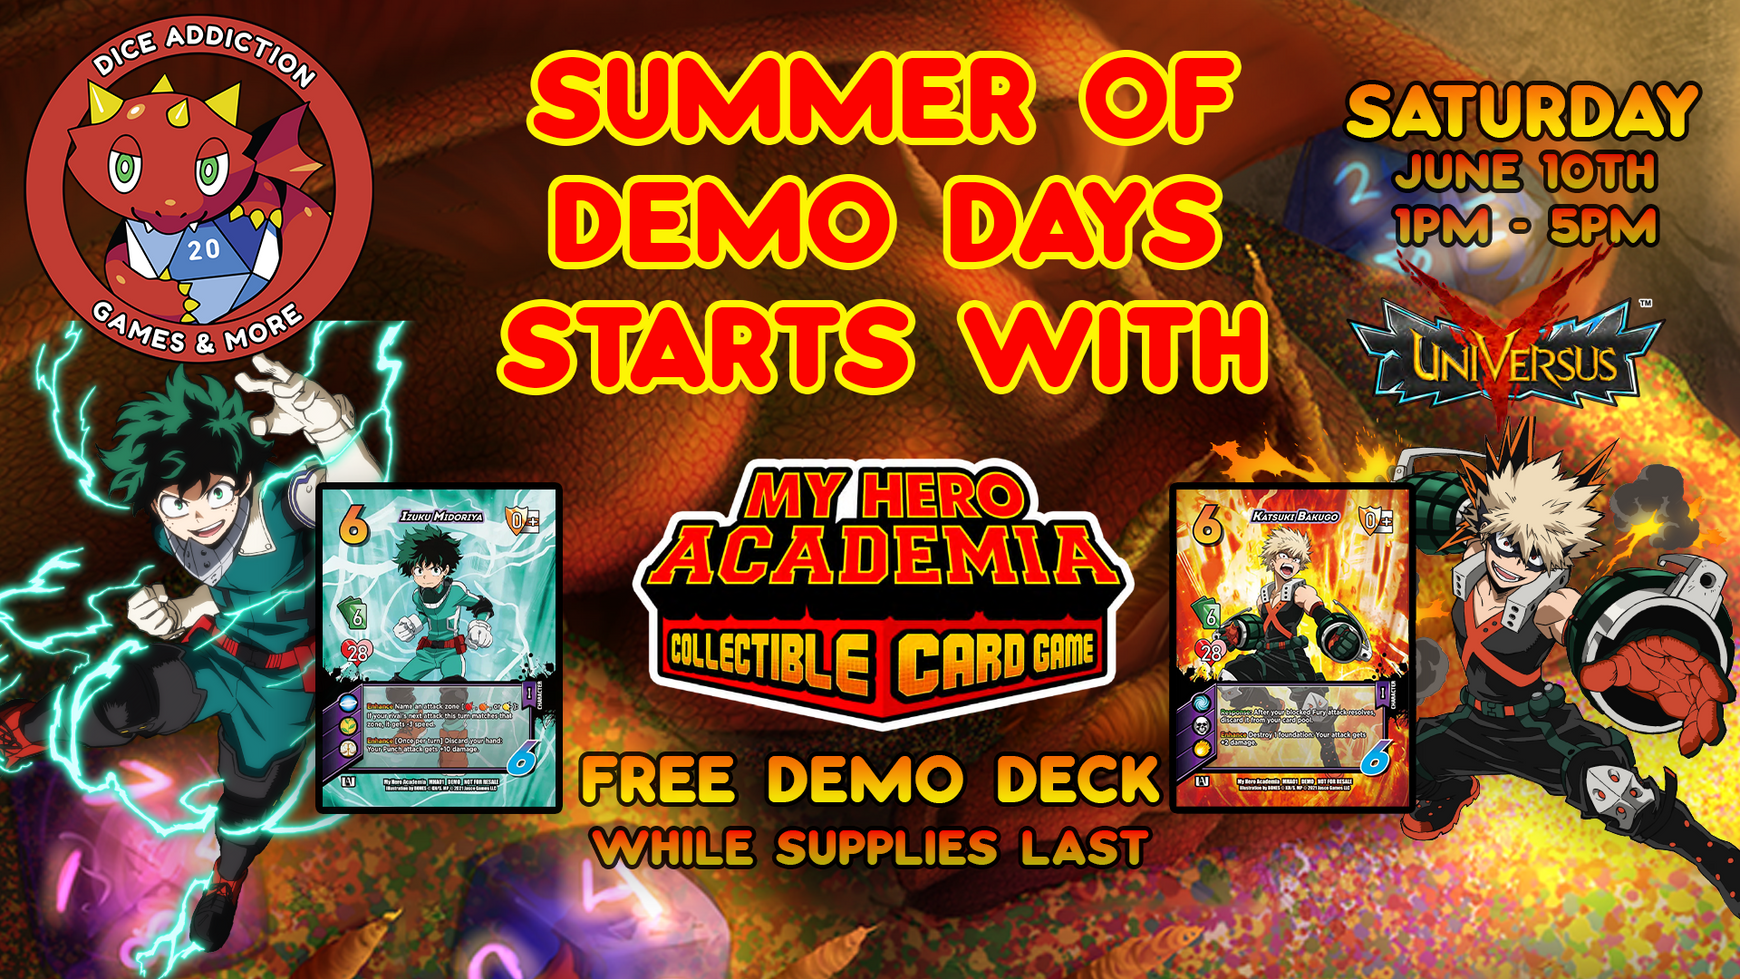 Experience Action-Packed Saturdays with Dice Addiction's My Hero Academia CCG Demo Days this Summer!